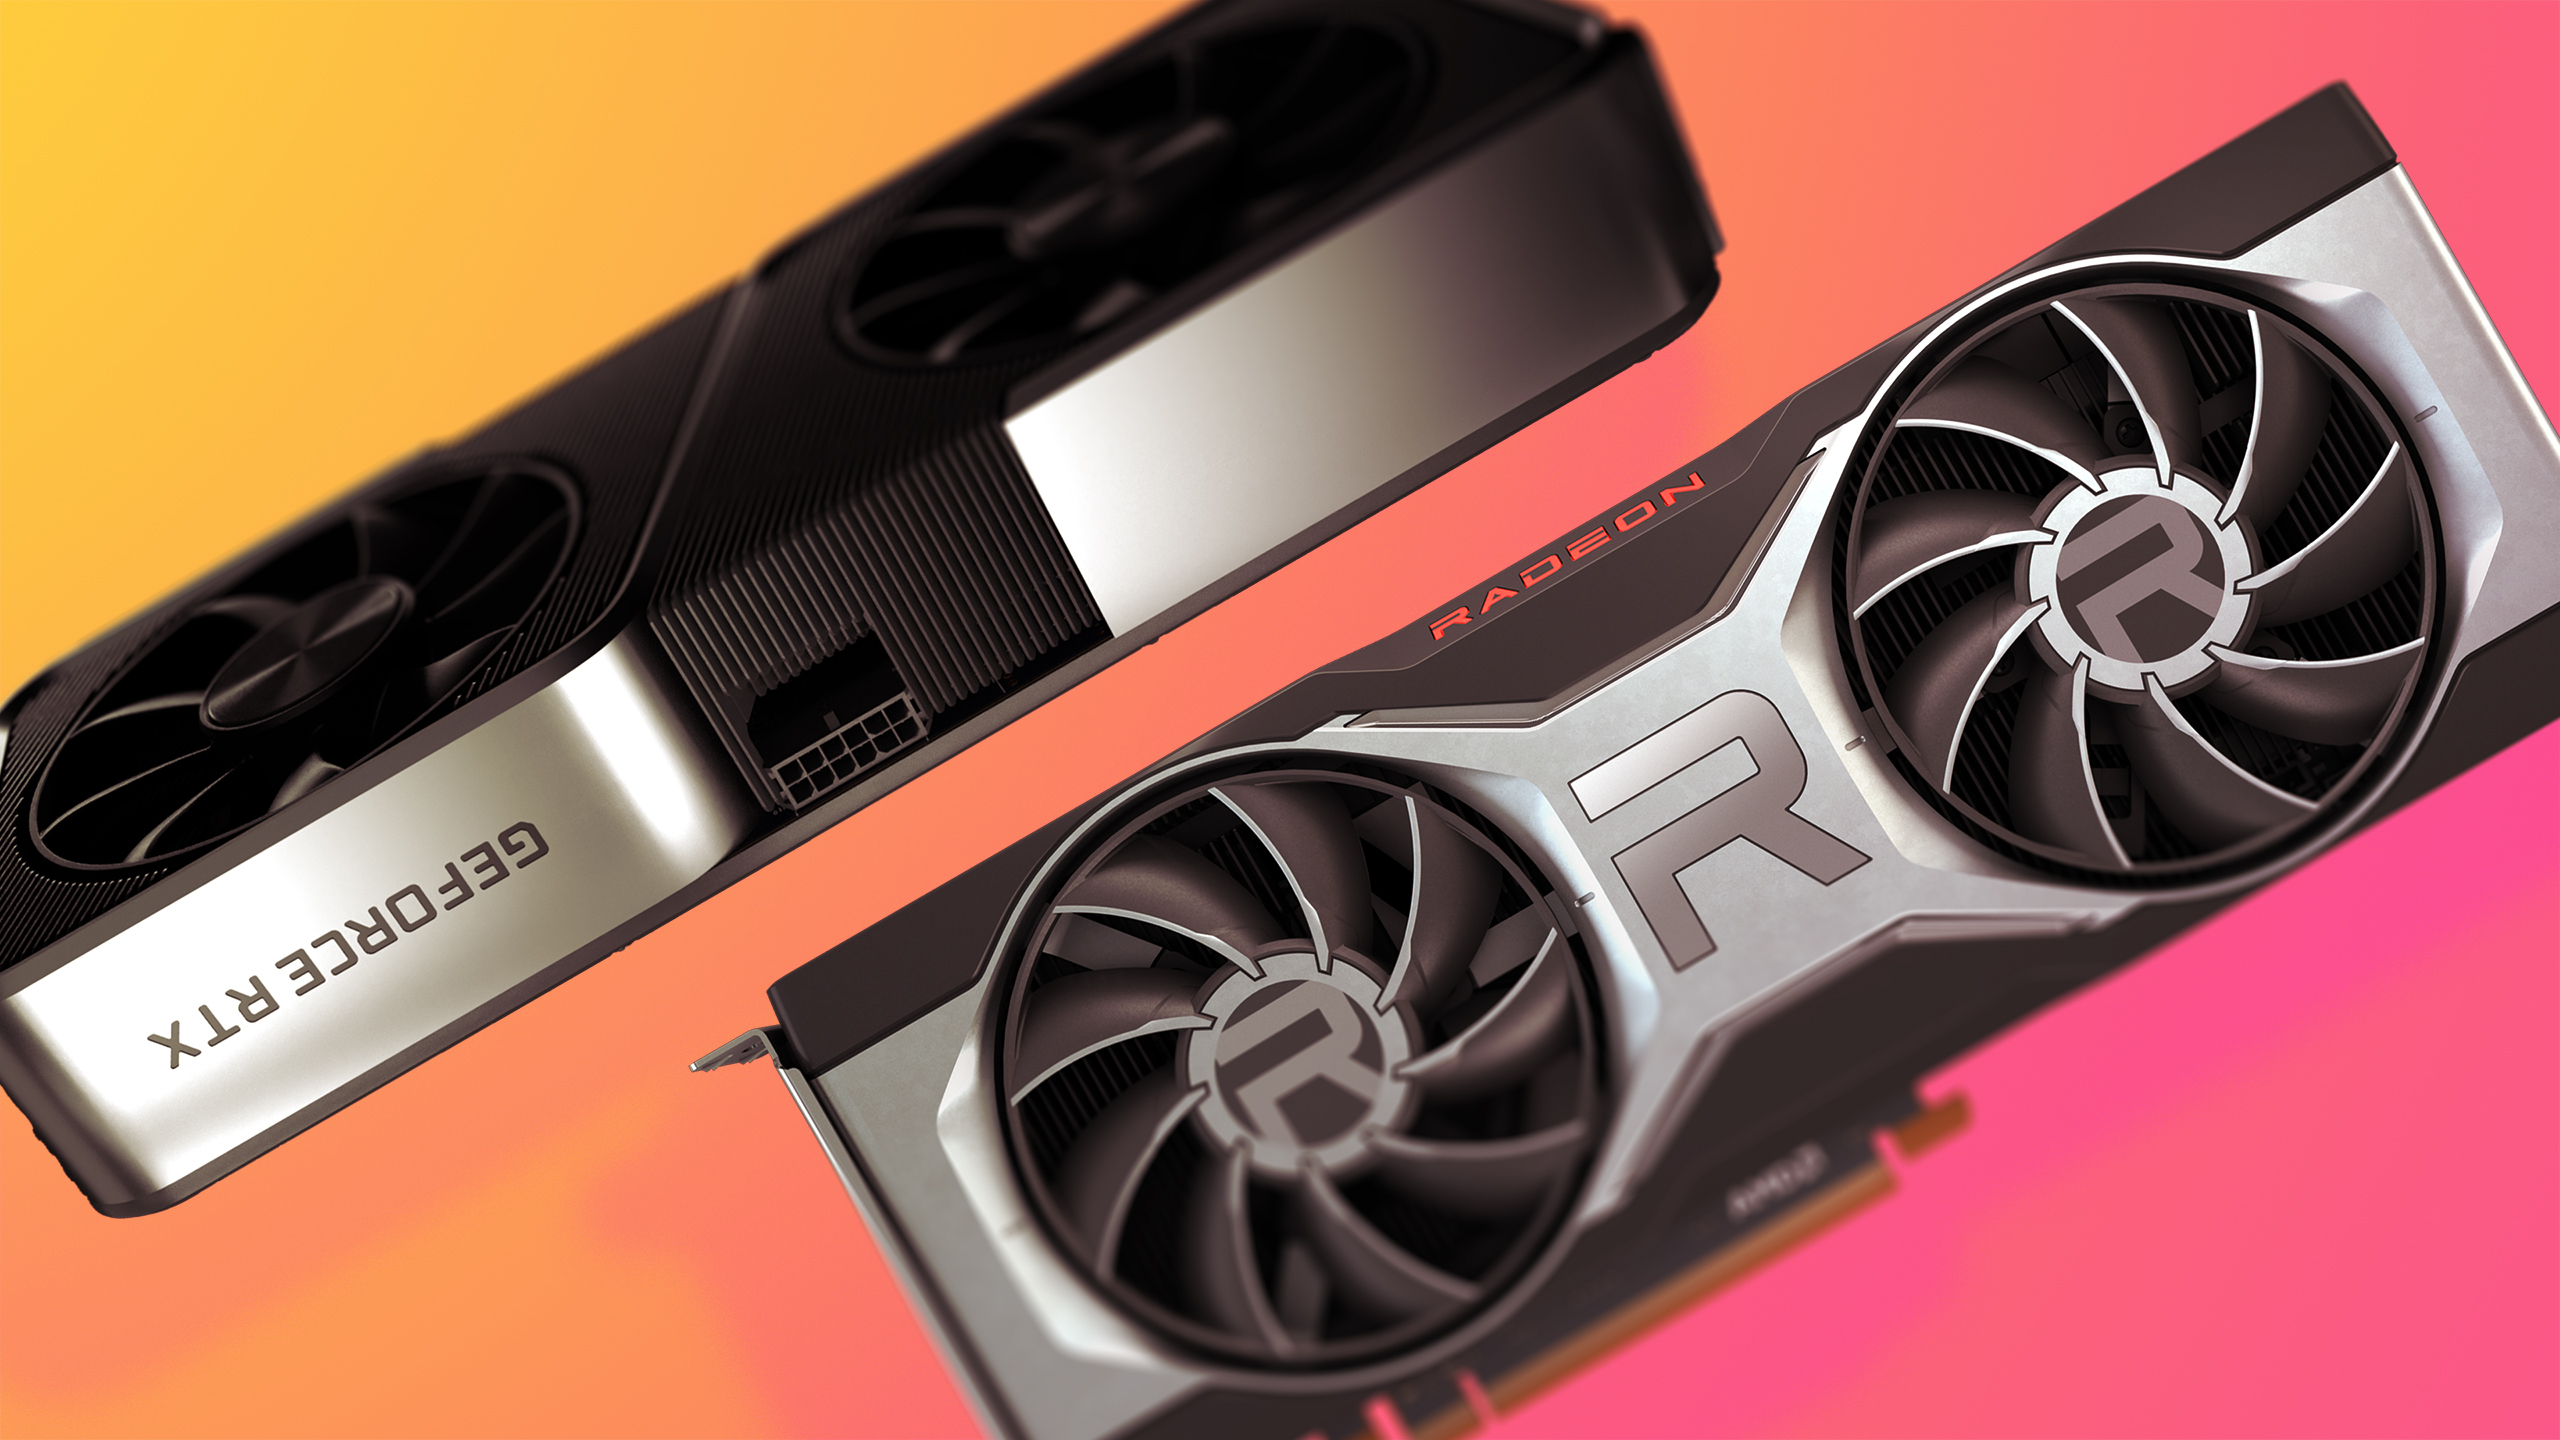 Nvidia RTX 3070 and AMD RX 6700 XT side by side in a colorful background